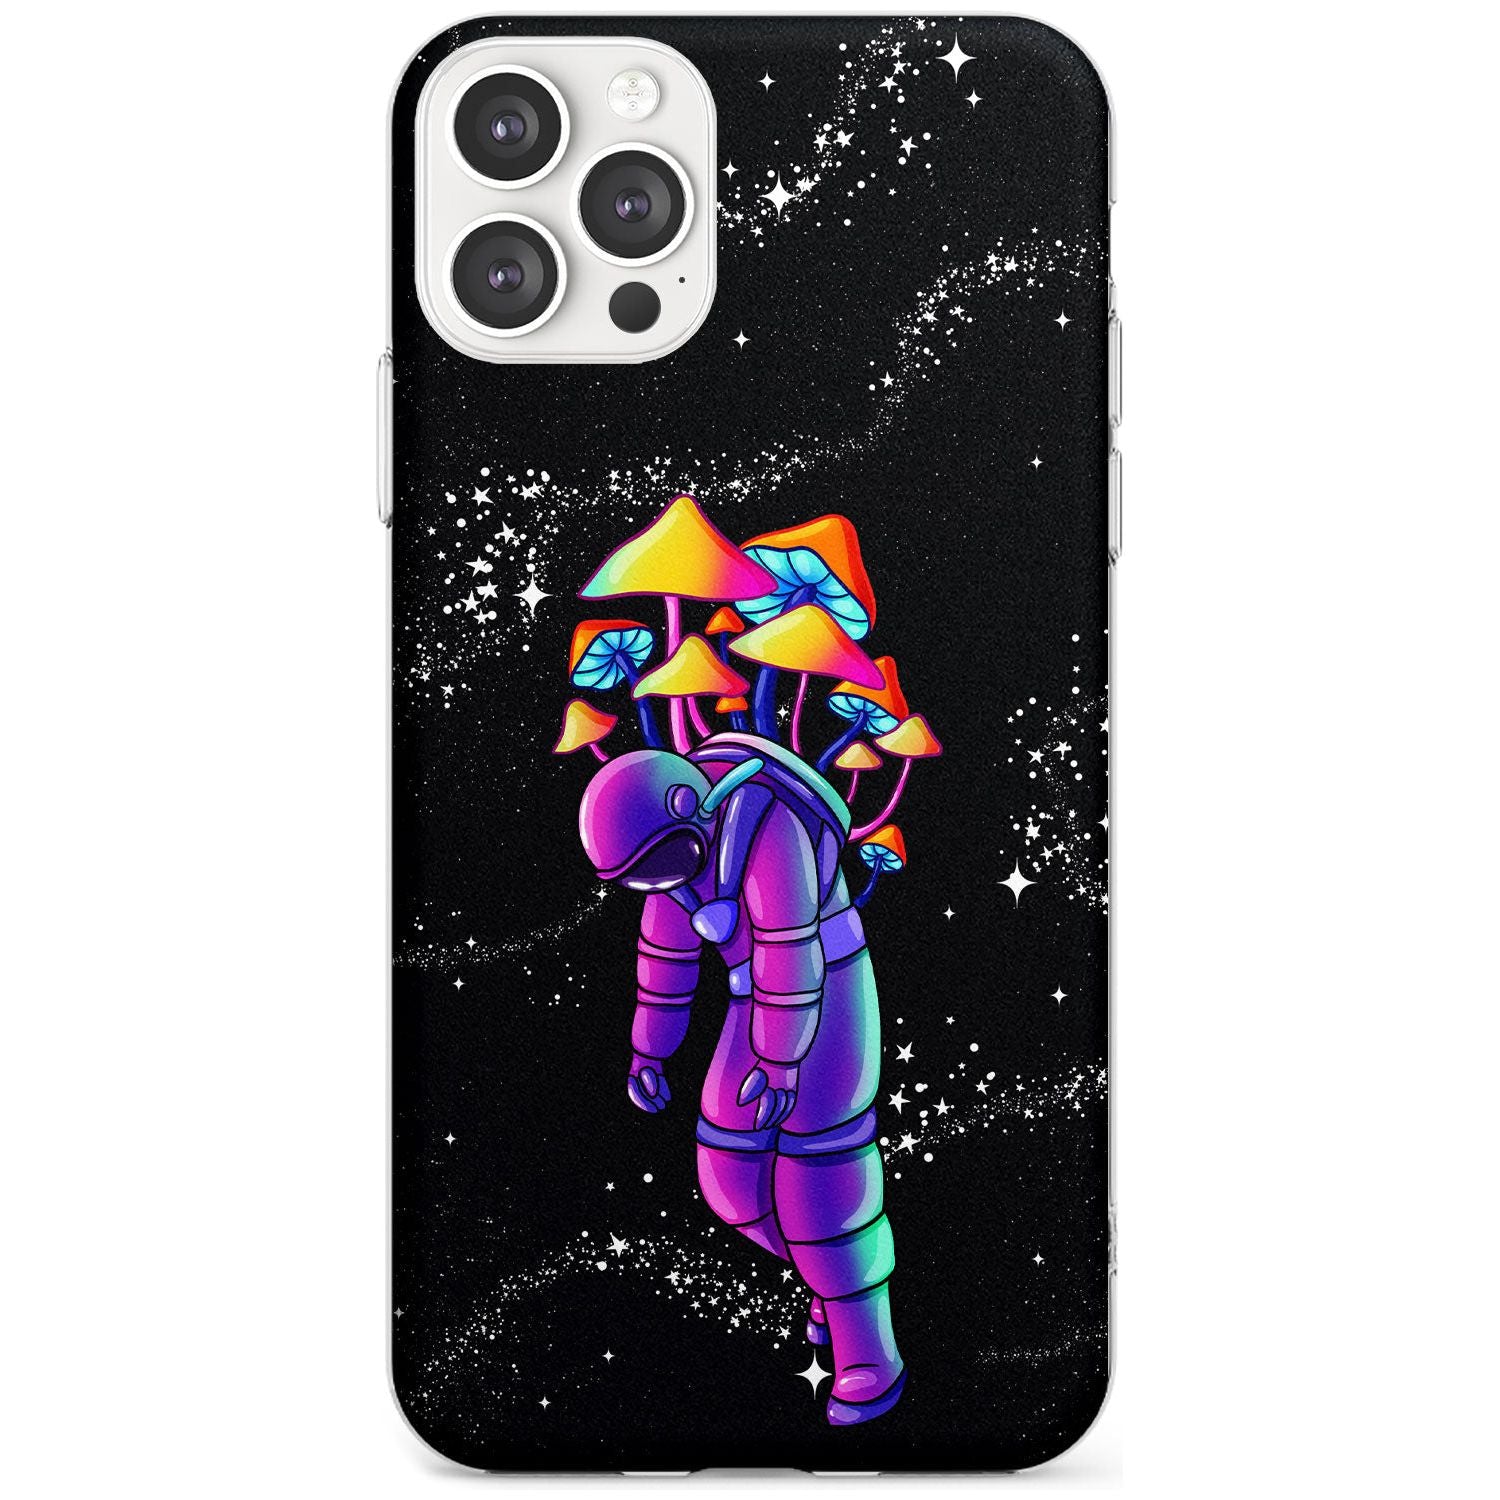 Space Mutation Slim TPU Phone Case for iPhone 11 Pro Max